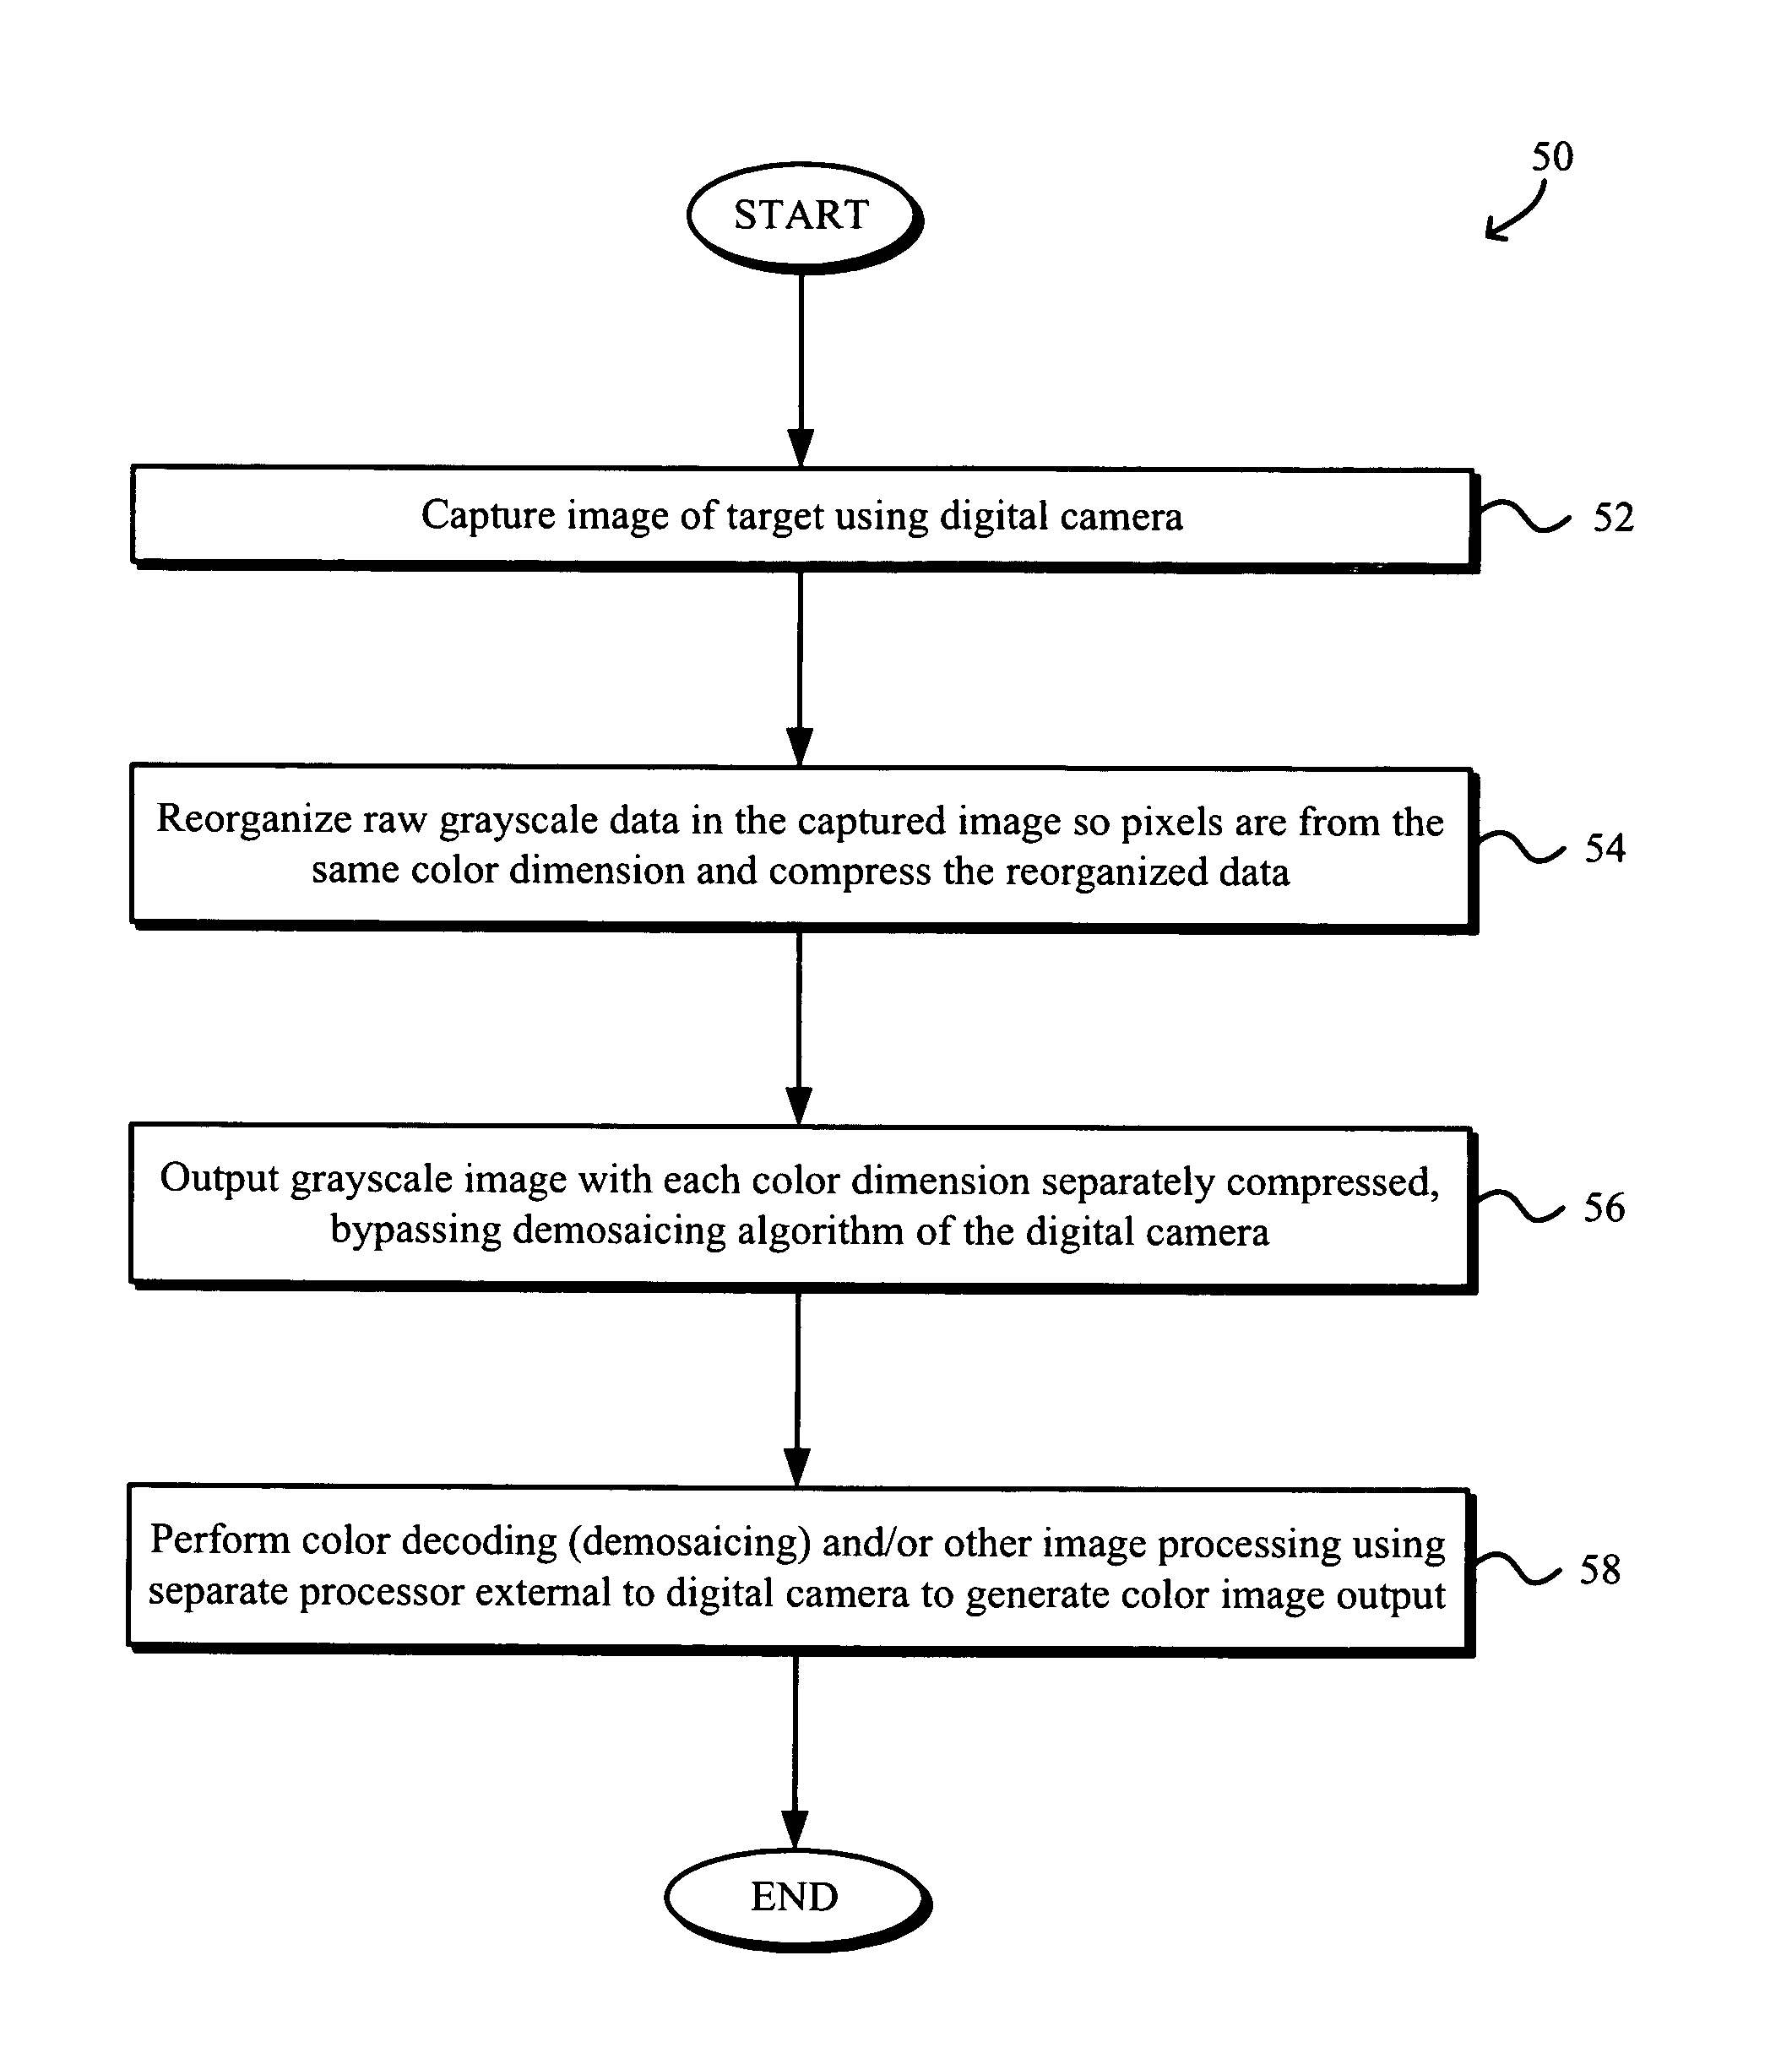 Reorganization of raw image data for processing